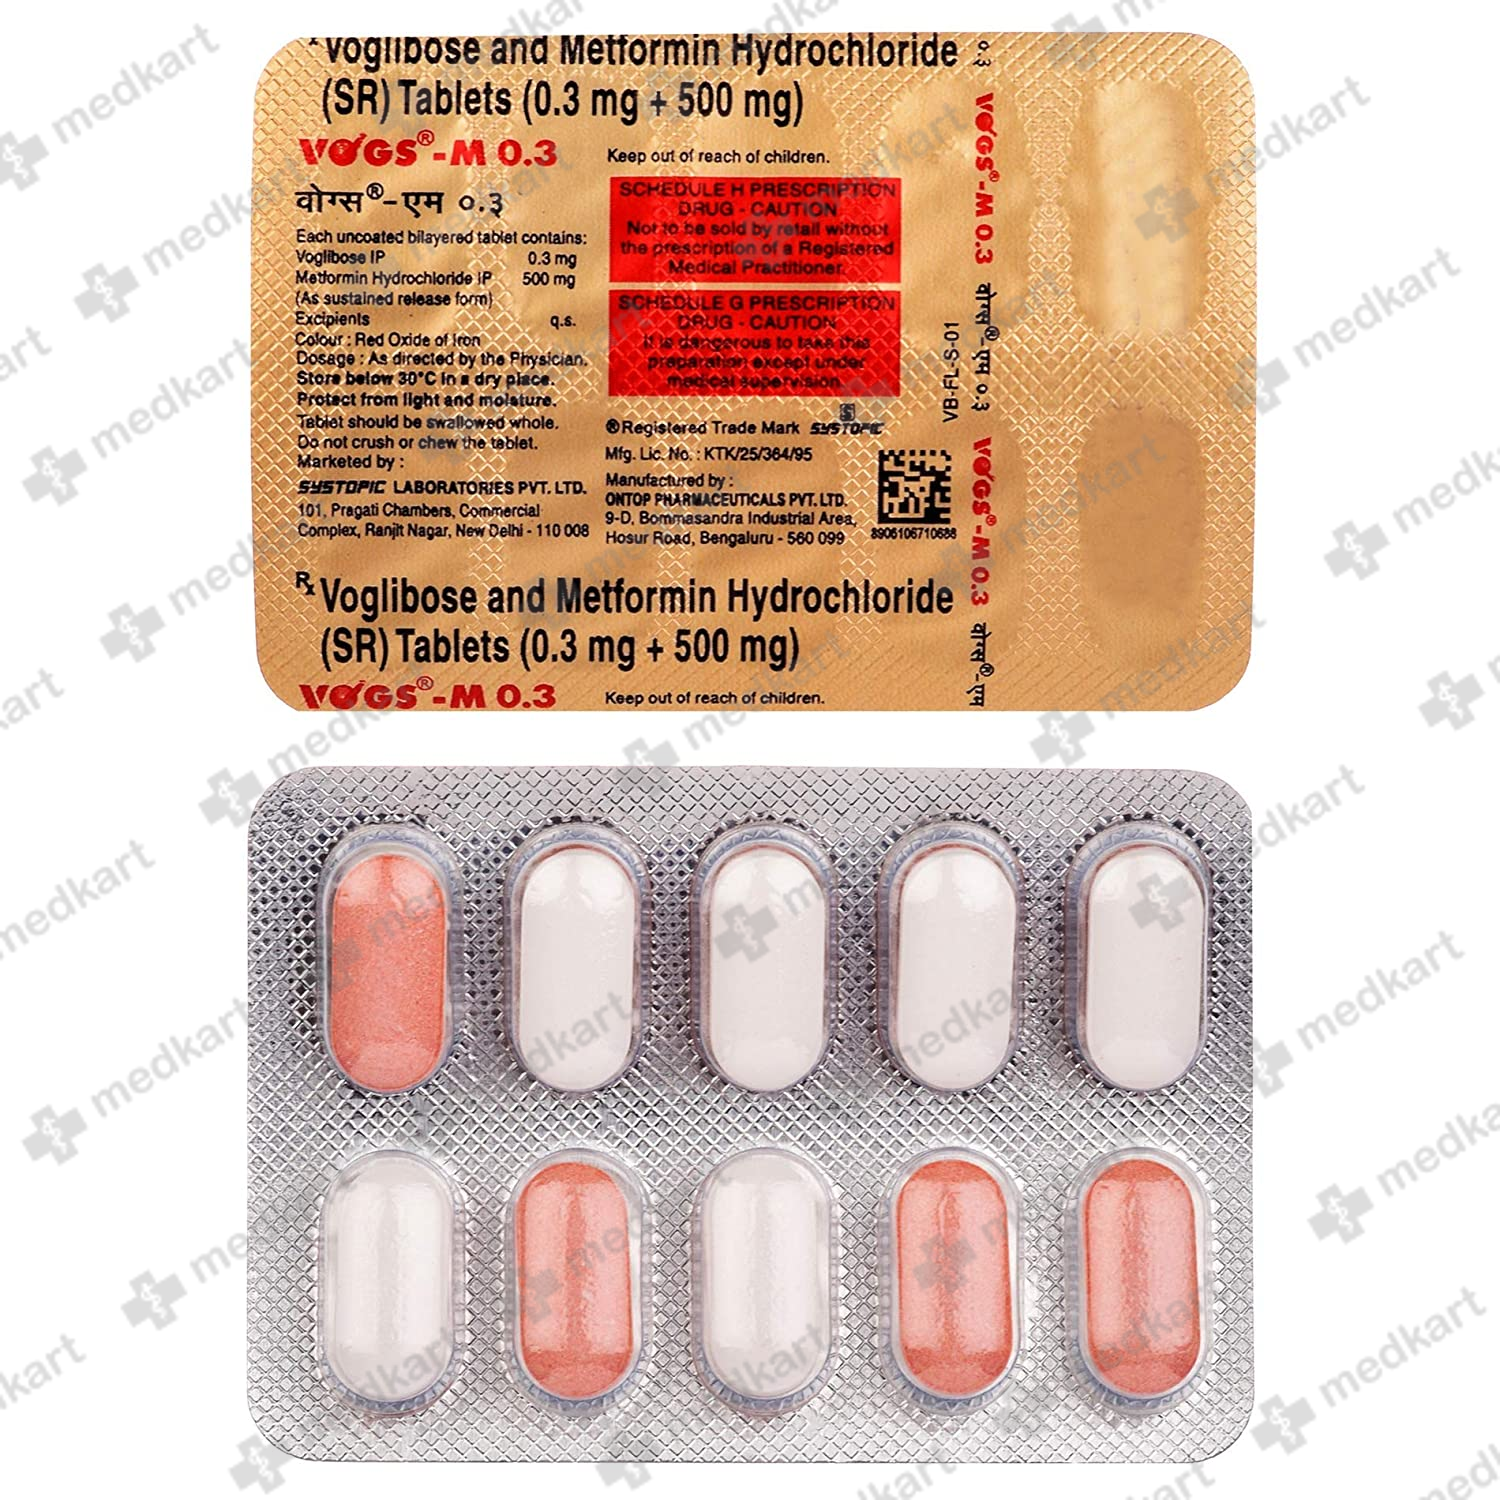 vogs-m-03mg-tablet-10s